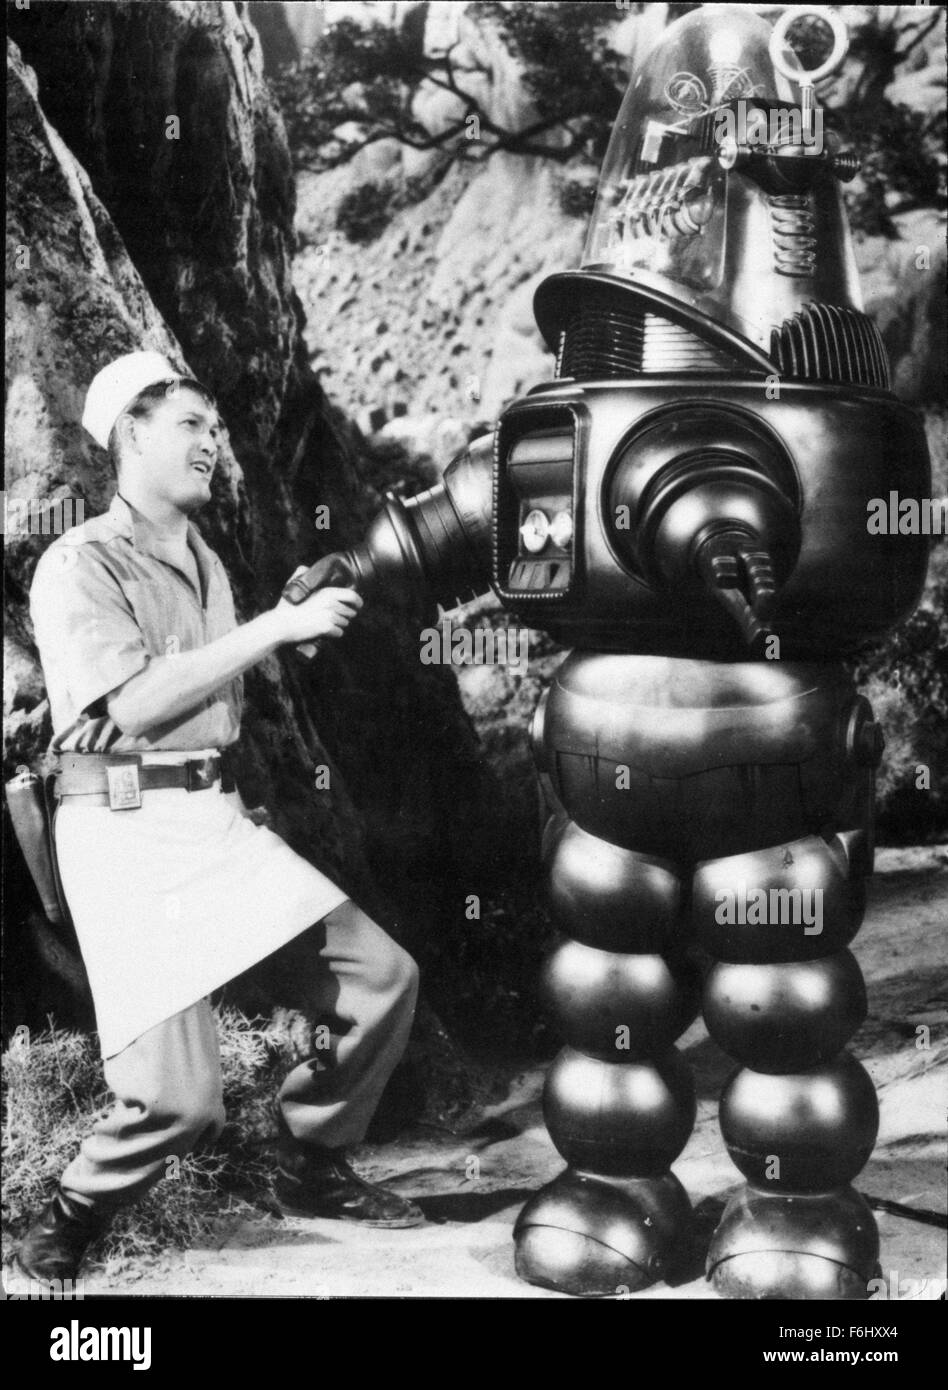 1956, Film Title: FORBIDDEN PLANET, Director: FRED McLEOD WILCOX, Studio: MGM, Pictured: EARL HOLLIMAN, ROBBY THE ROBOT, ROBOTS-ANDROIDS-CYBORGS-CLONES, SCI-FI, SPACE EXPLORATION, SHAKING HANDS, INTRODUCING, INTRODUCTION, ROBOT, ALIENS, GOOD, BEFRIENDING, FRIEND, HUMAN, THE TEMPEST. (Credit Image: SNAP) Stock Photo